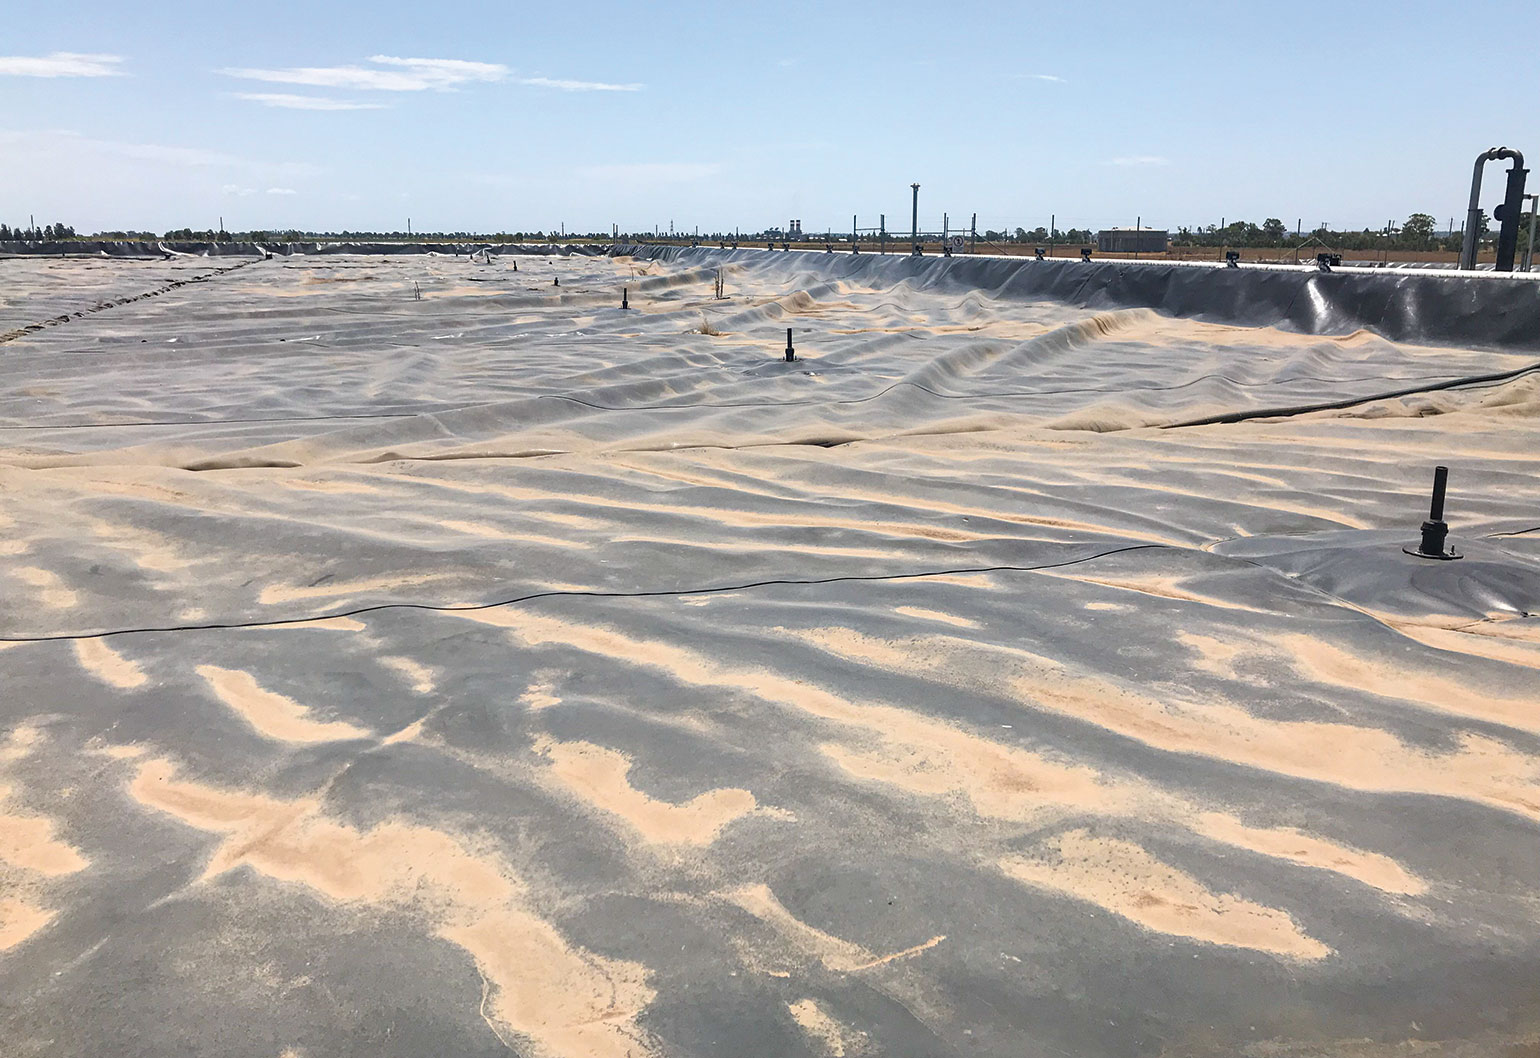 Bacteria produce biogas in this covered lagoon